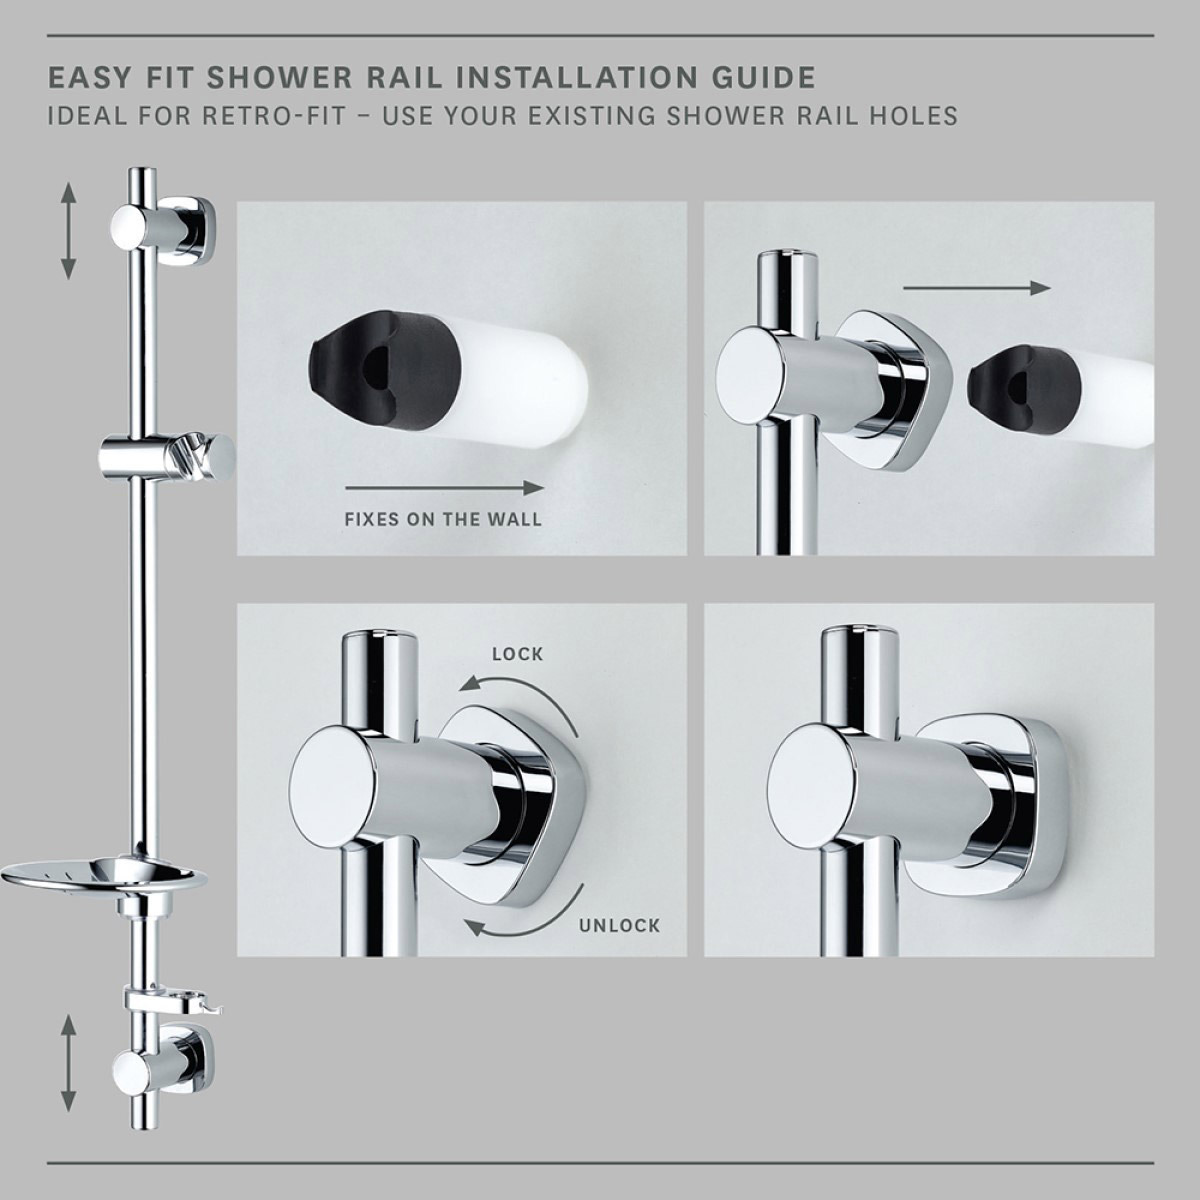 Compiled image of fitting fixtures